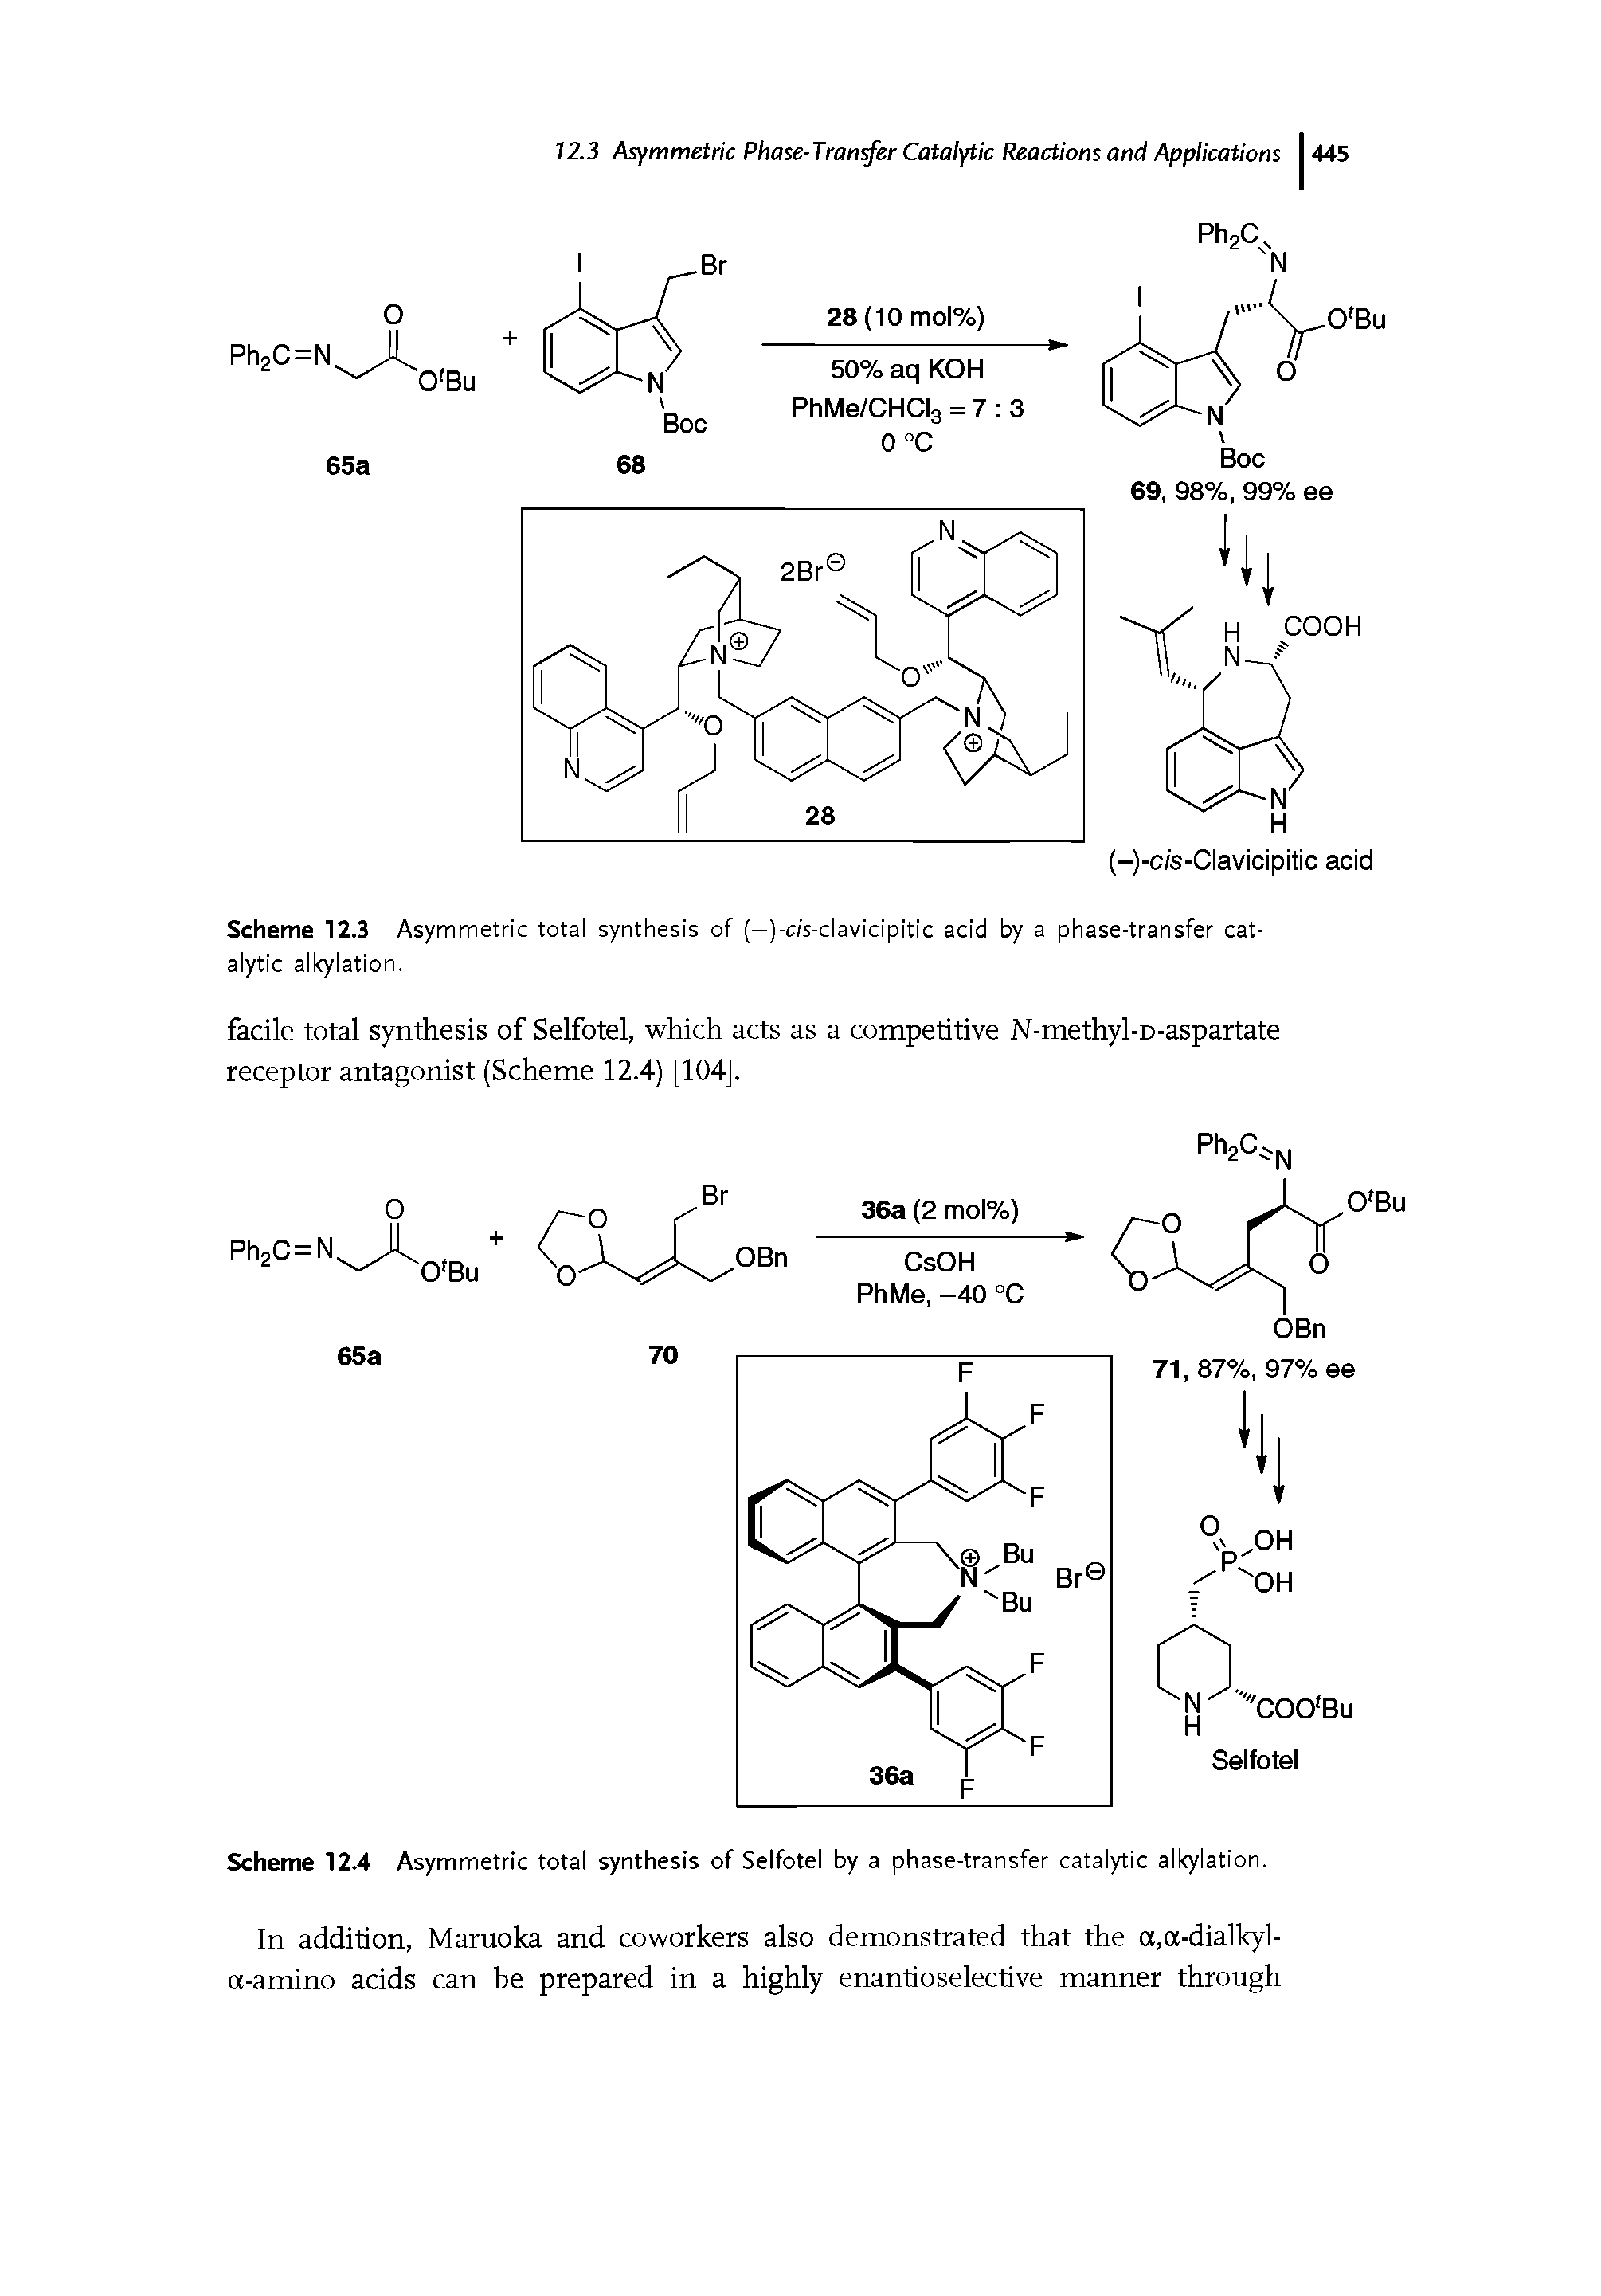 Scheme 12.3 Asymmetric total synthesis of (-)-c/s-clavicipitic acid by a phase-transfer catalytic alkylation.